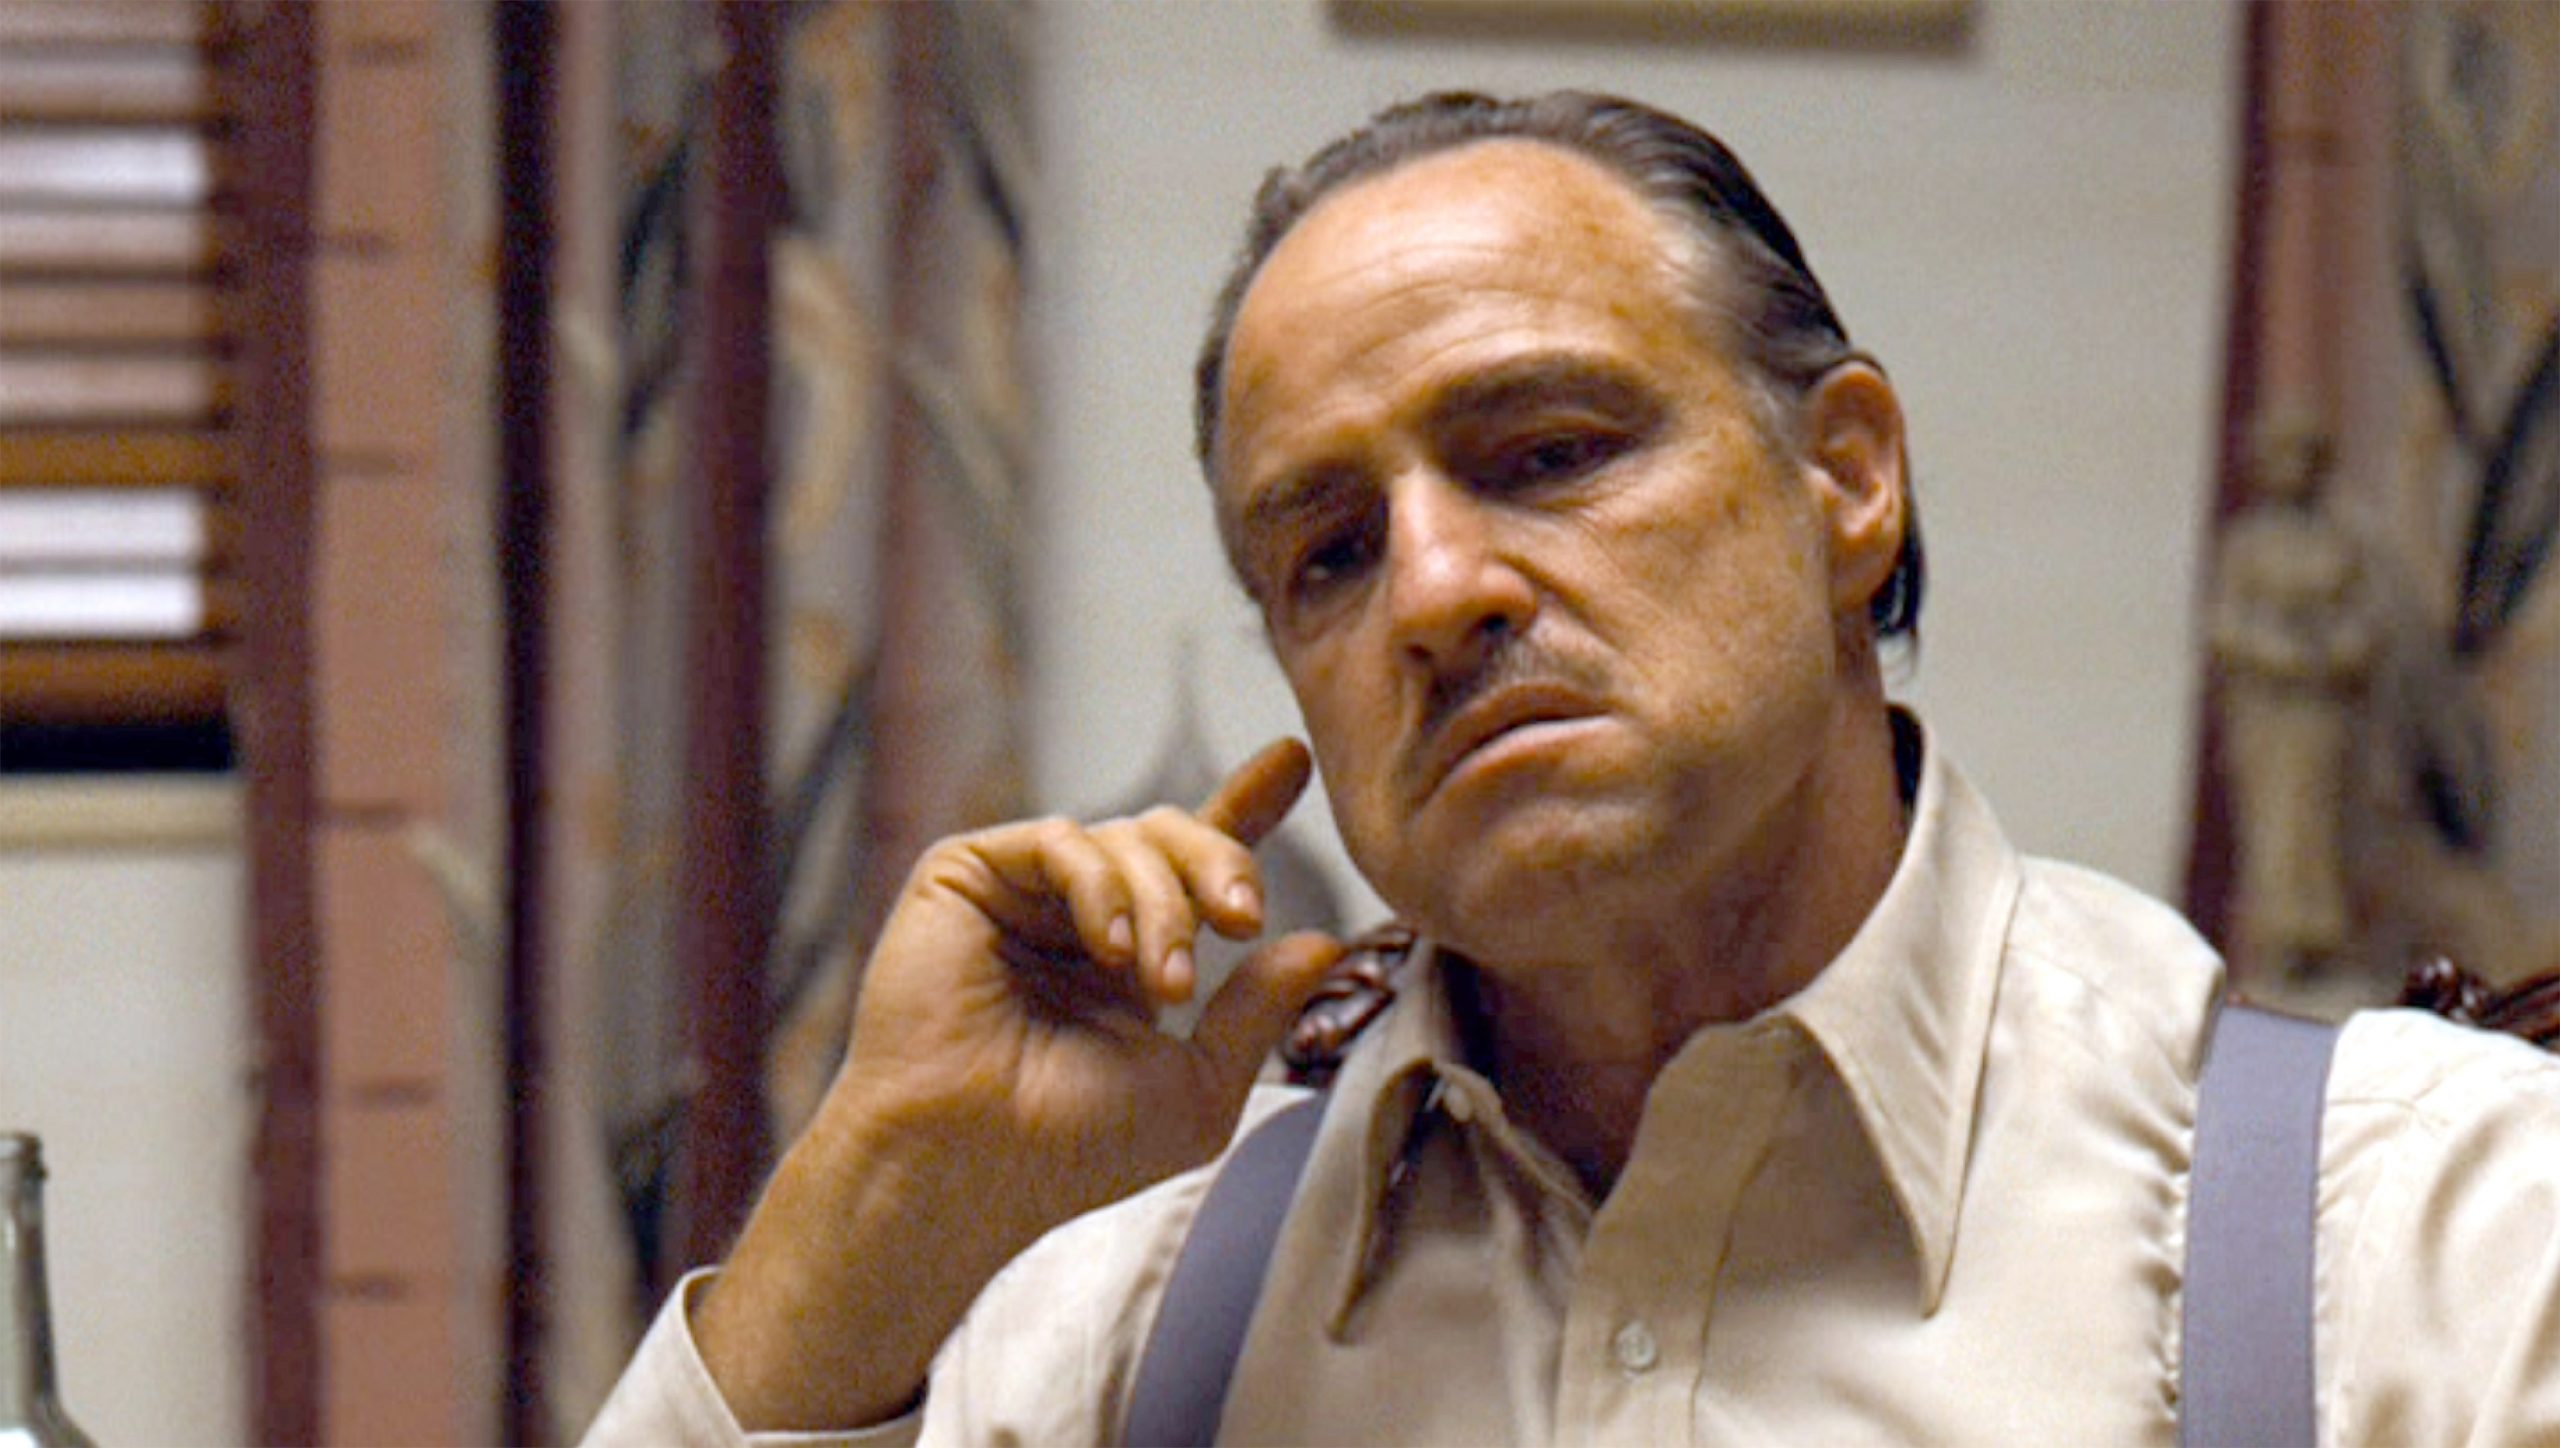 Why Marlon Brando Did Not Return For ‘The Godfather Part II’